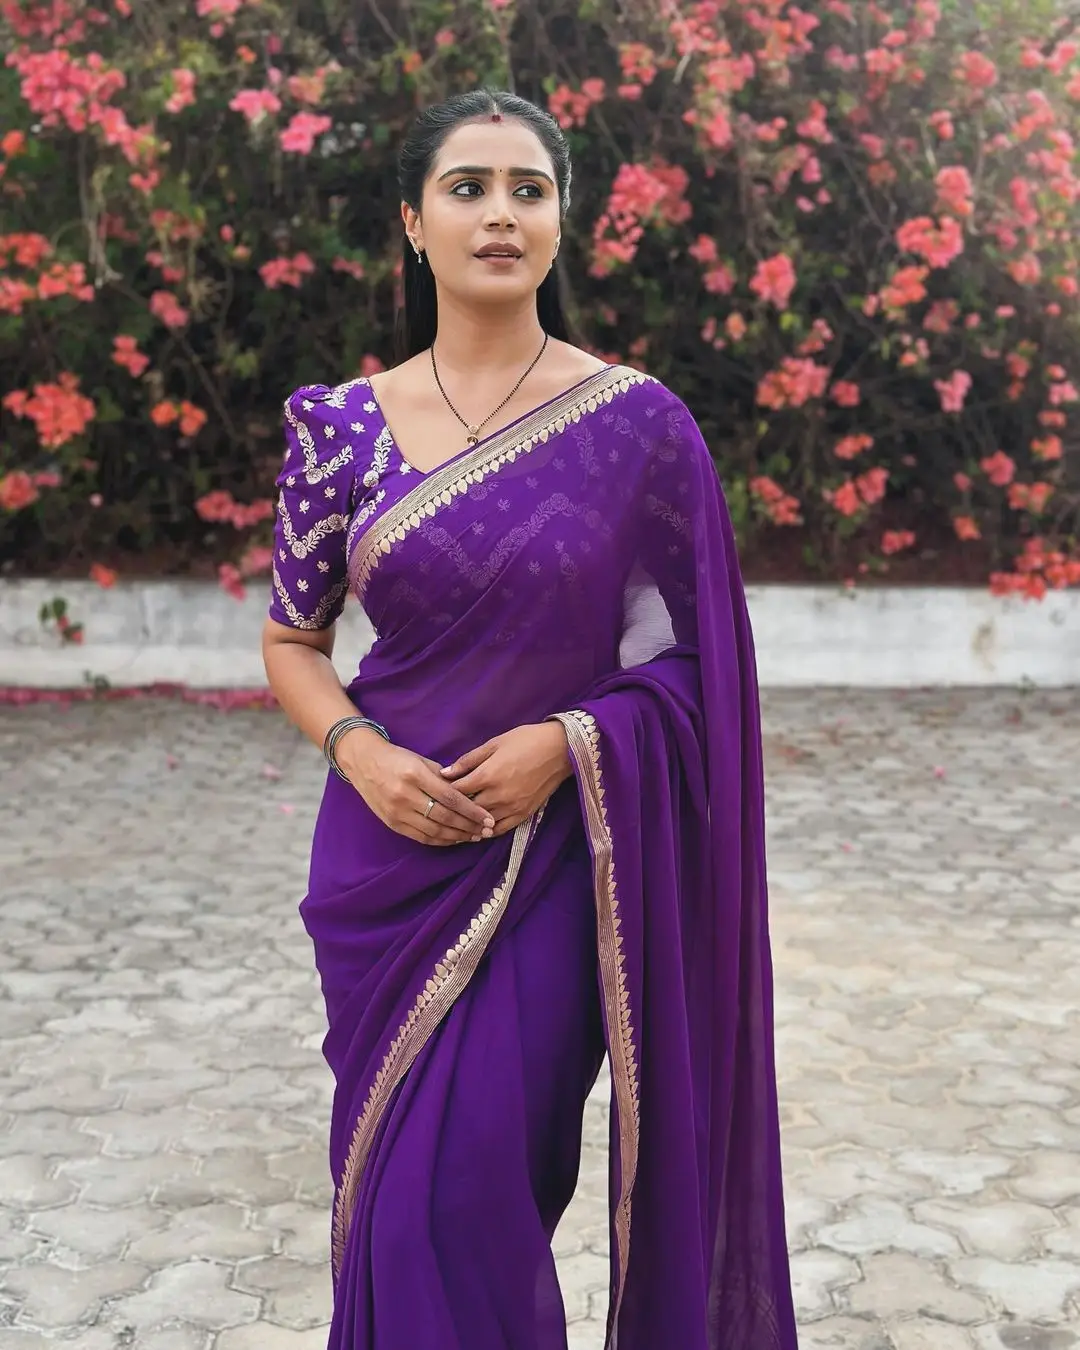 INDIAN GIRL KAVYA SHREE IN TRADITIONAL VIOLET SAREE BLOUSE 5